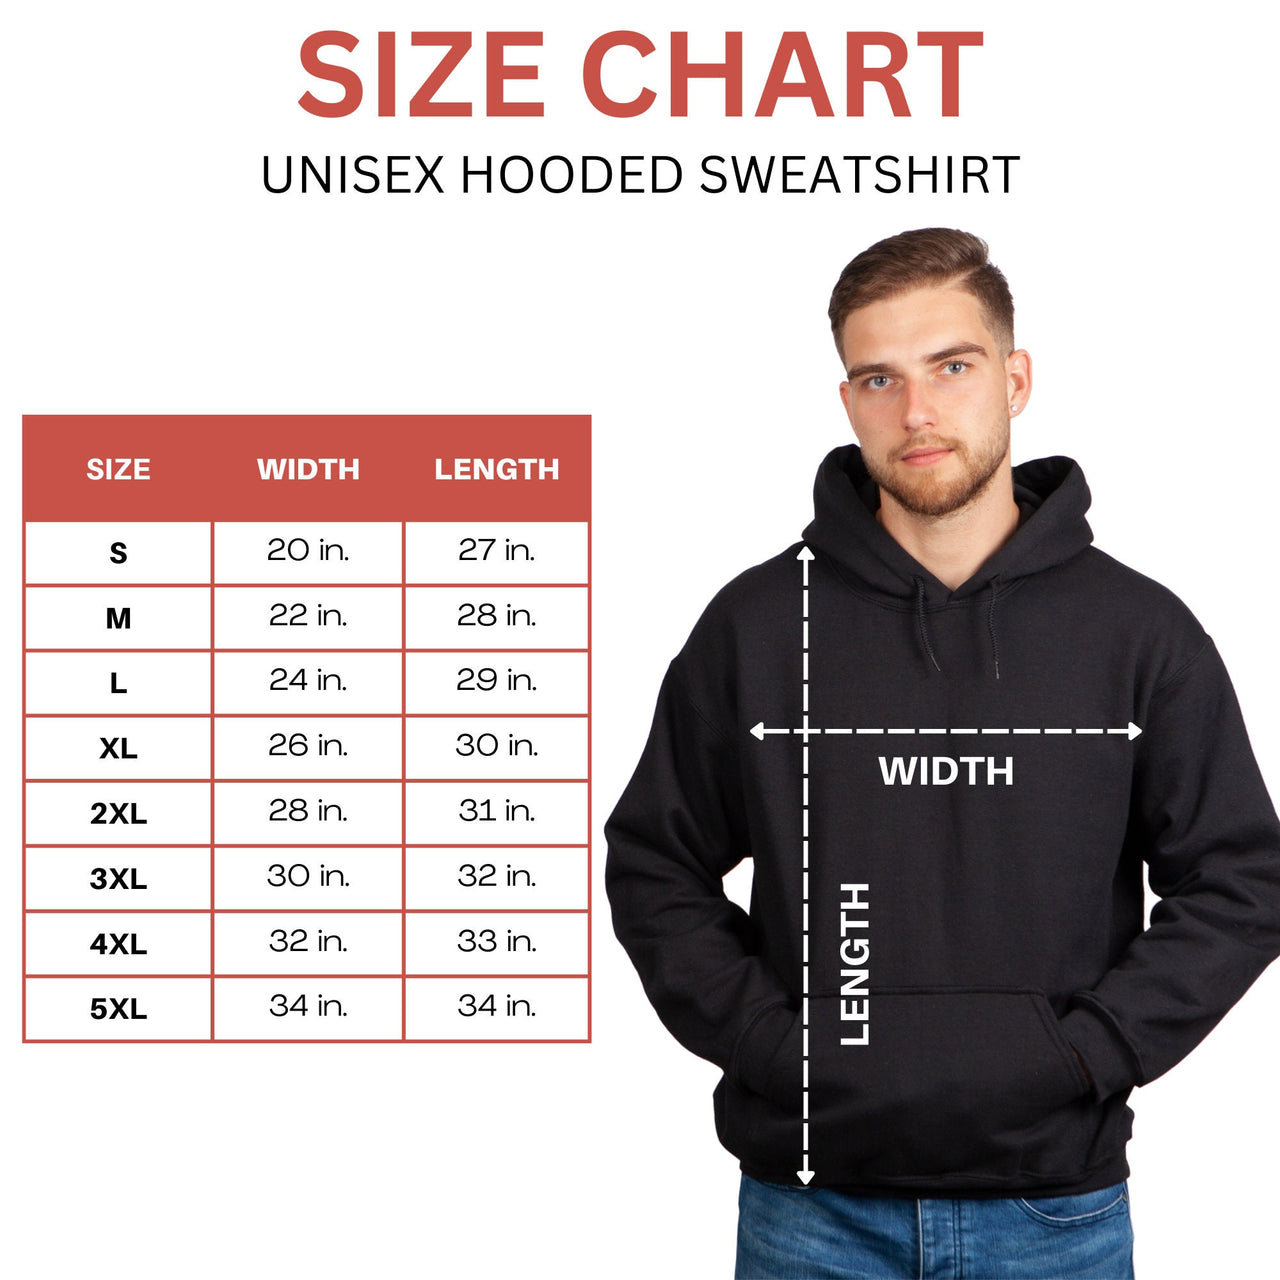 Hunting and Fishing Hoodie for Men